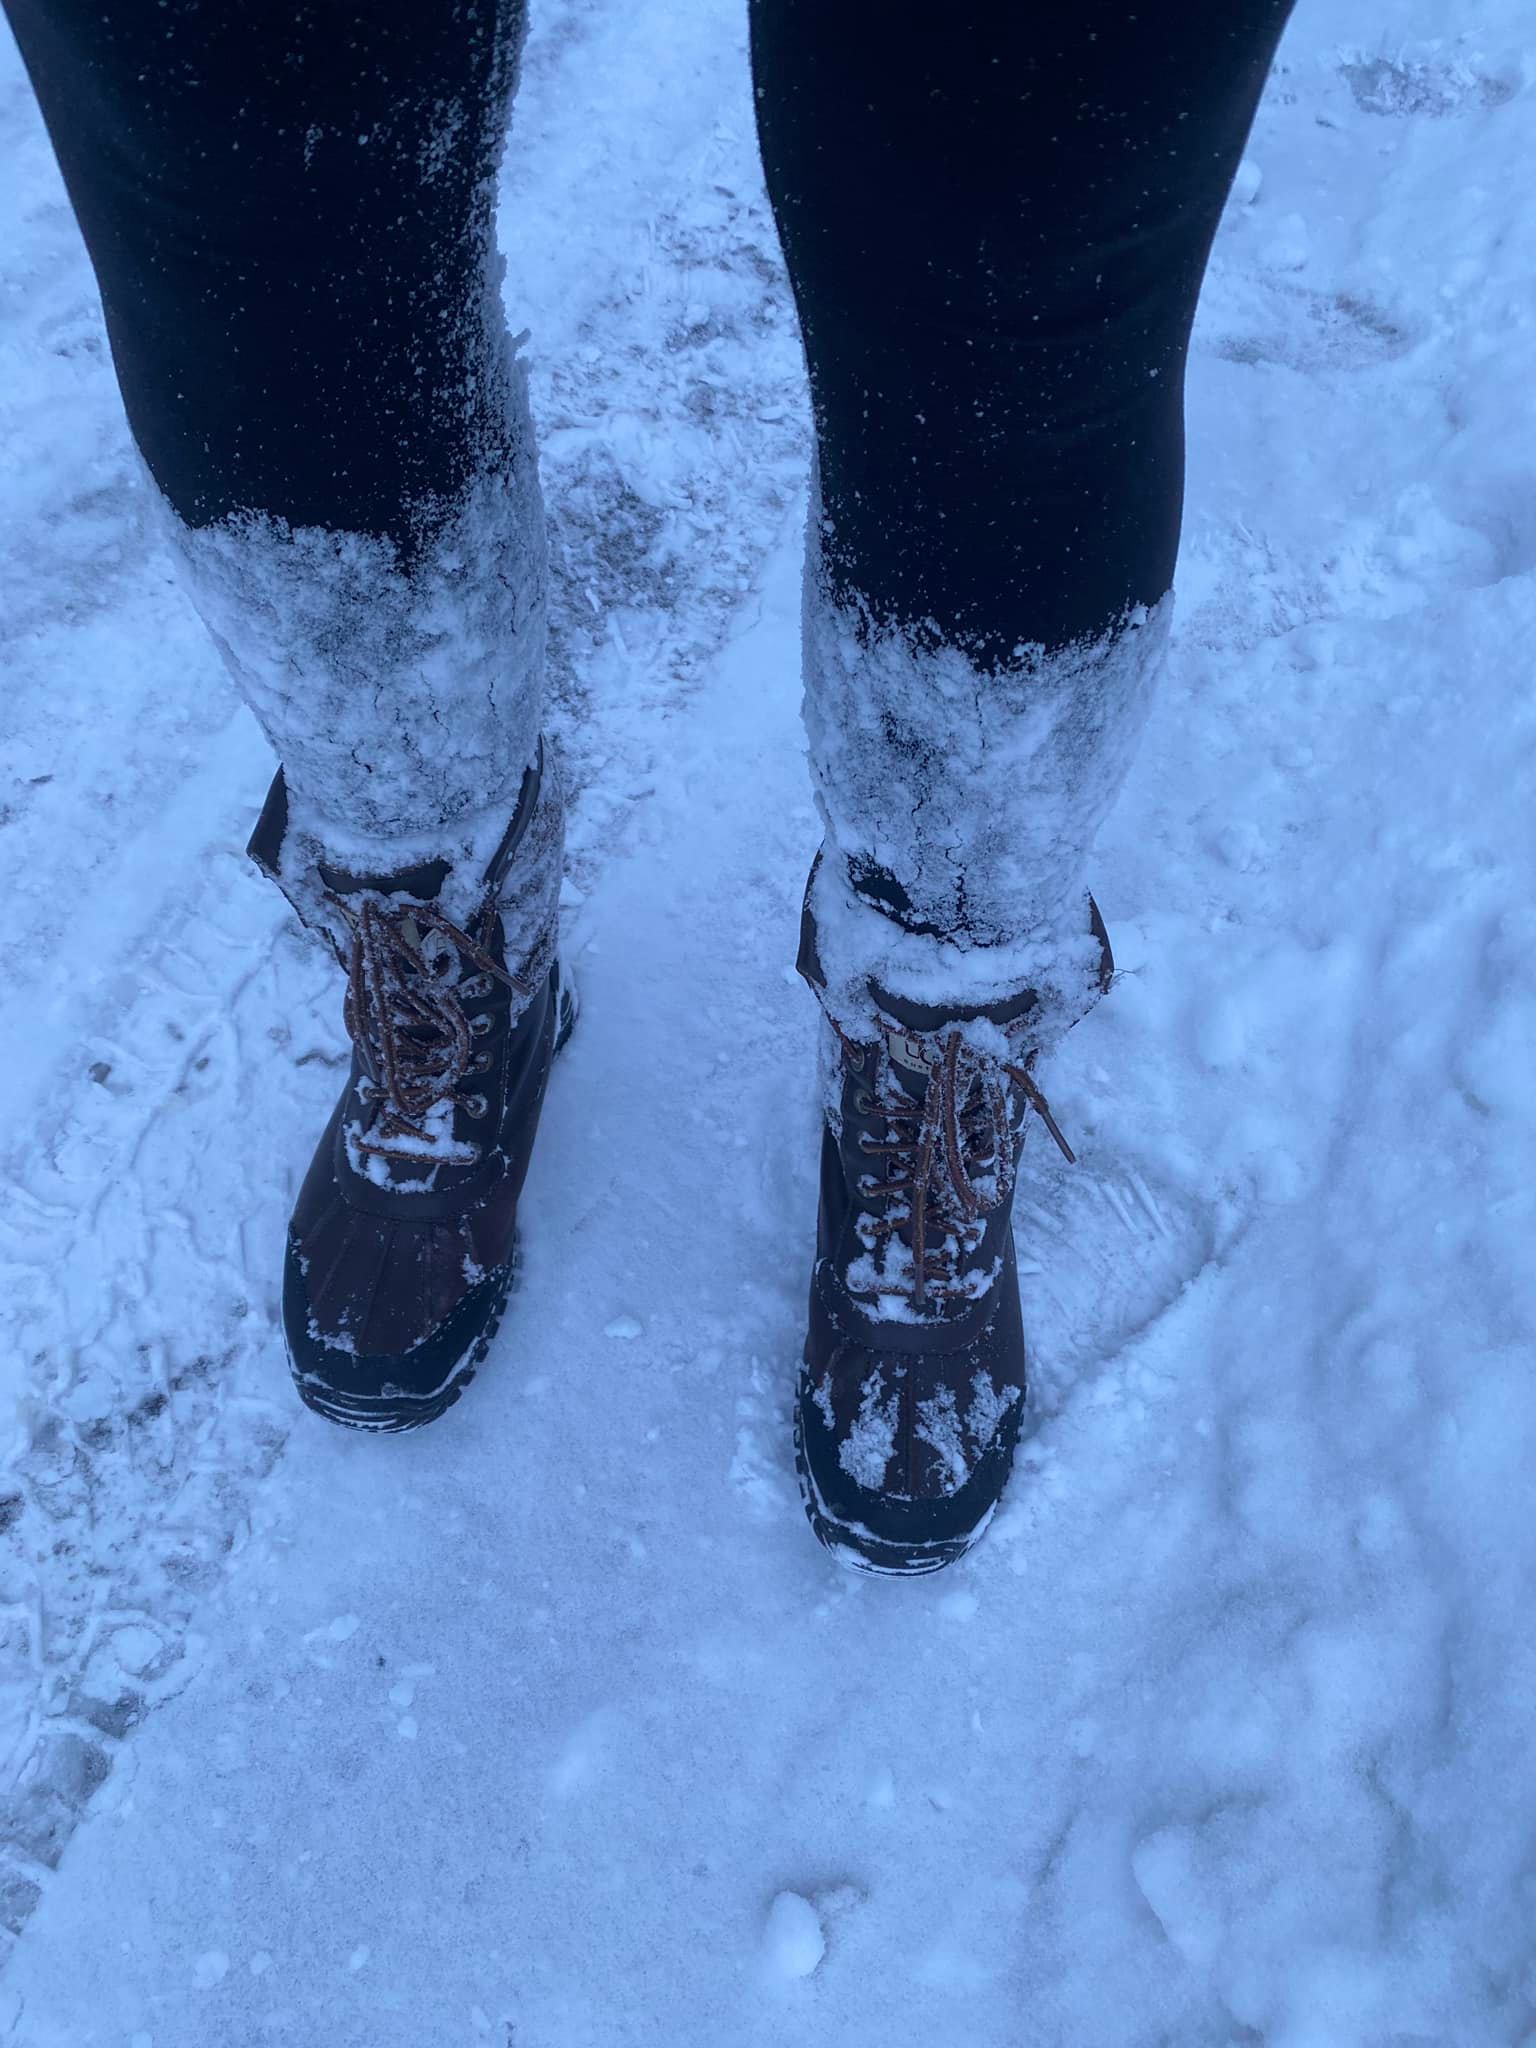 May be an image of footwear and snow